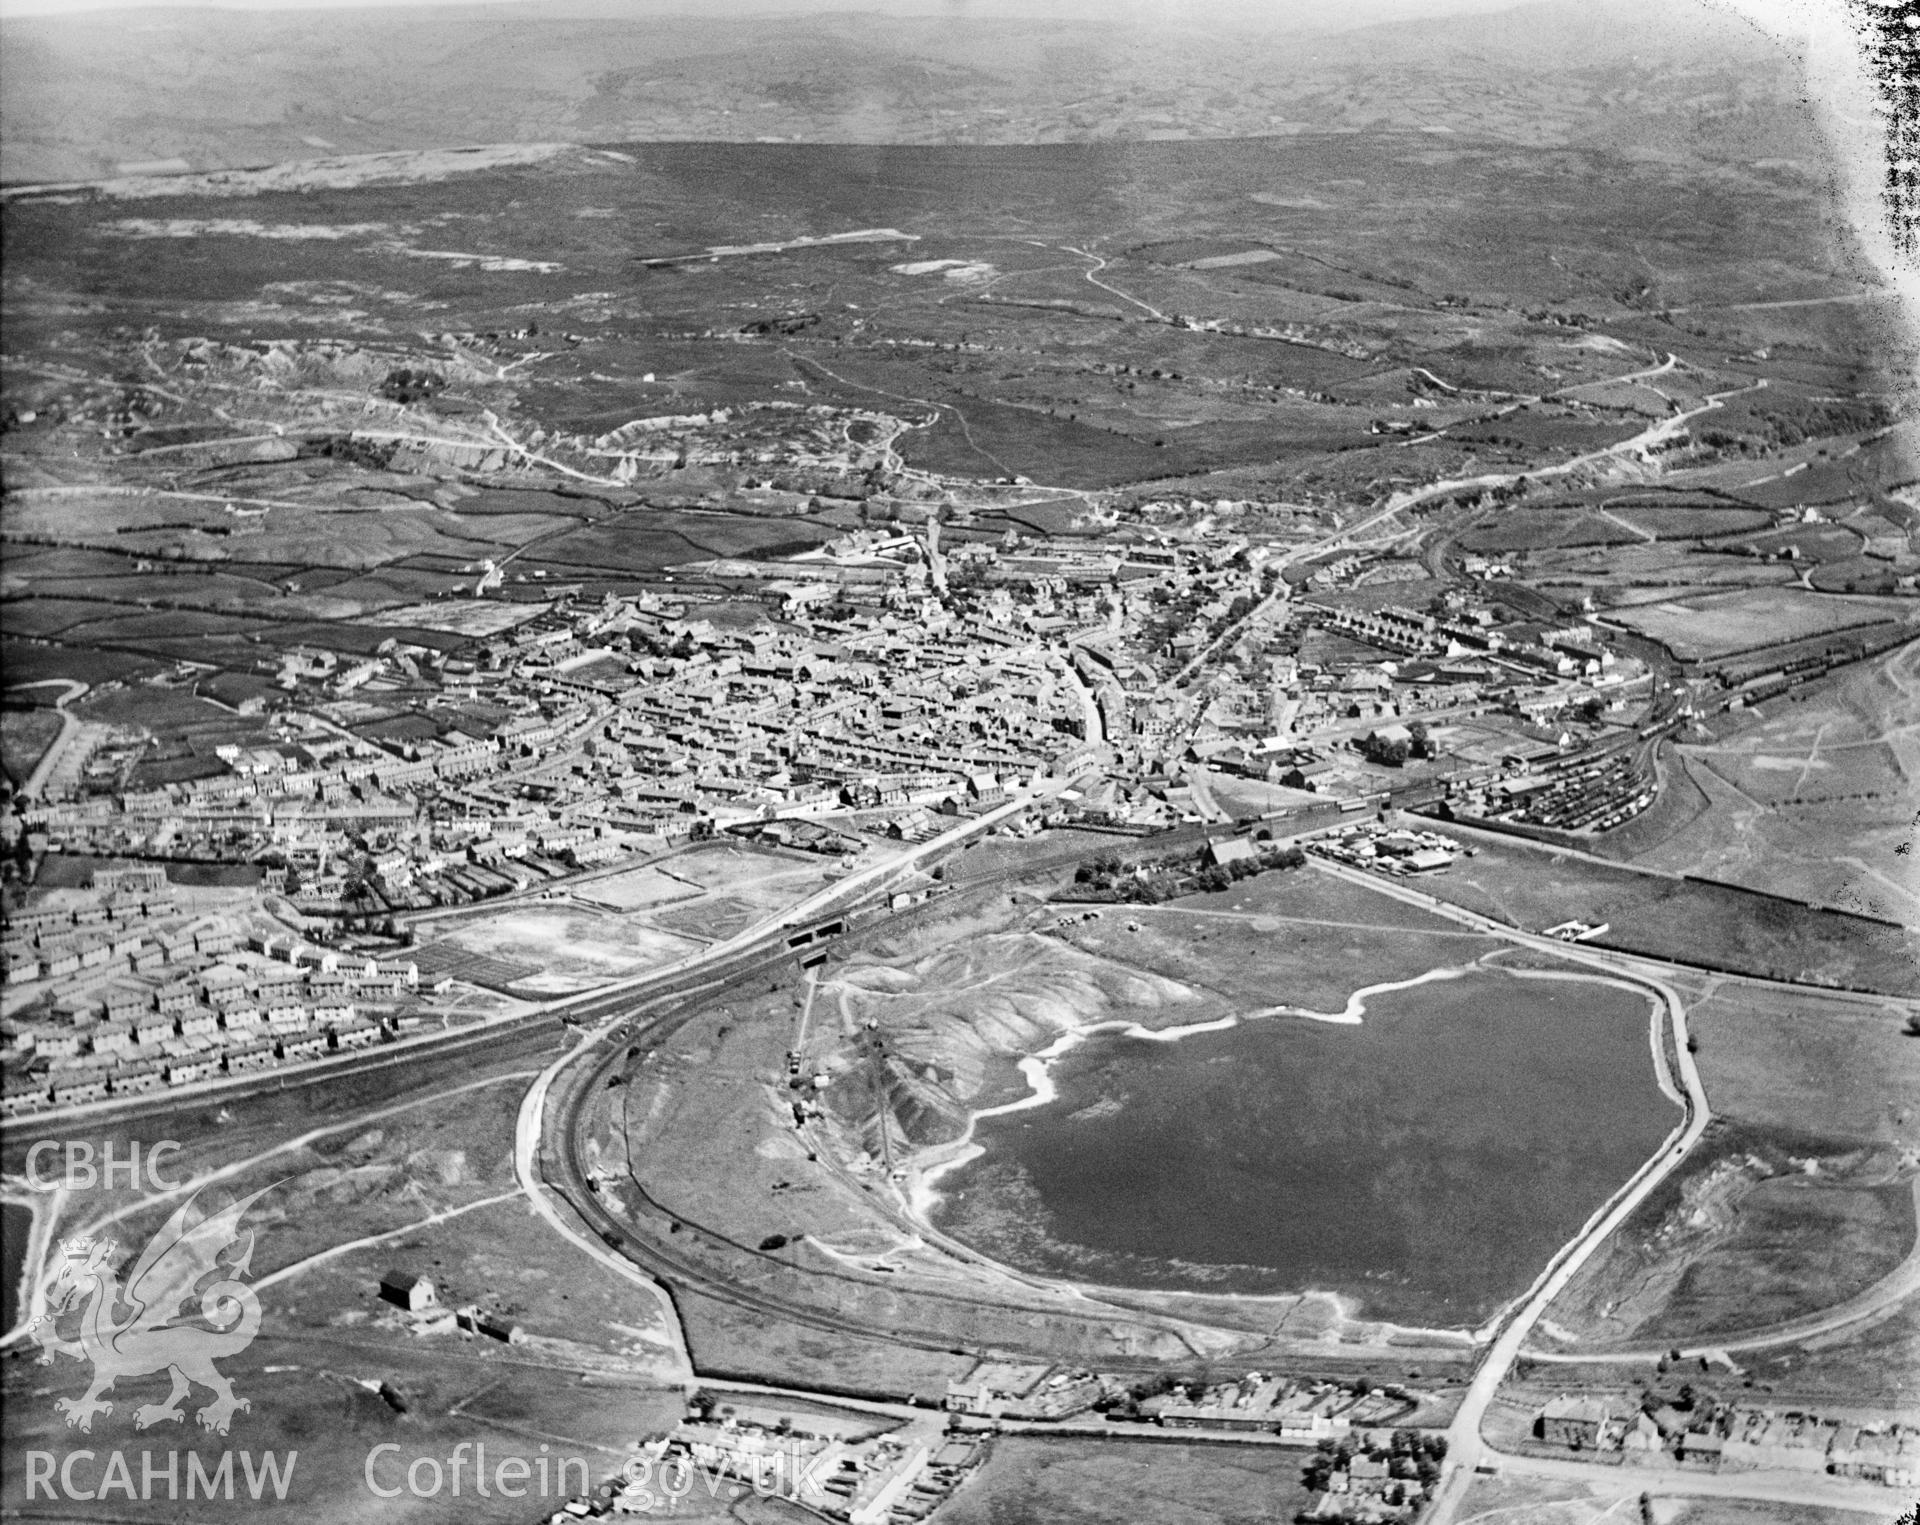 View of Brynmawr showing reservoir, oblique aerial view. 5?x4? black and white glass plate negative.